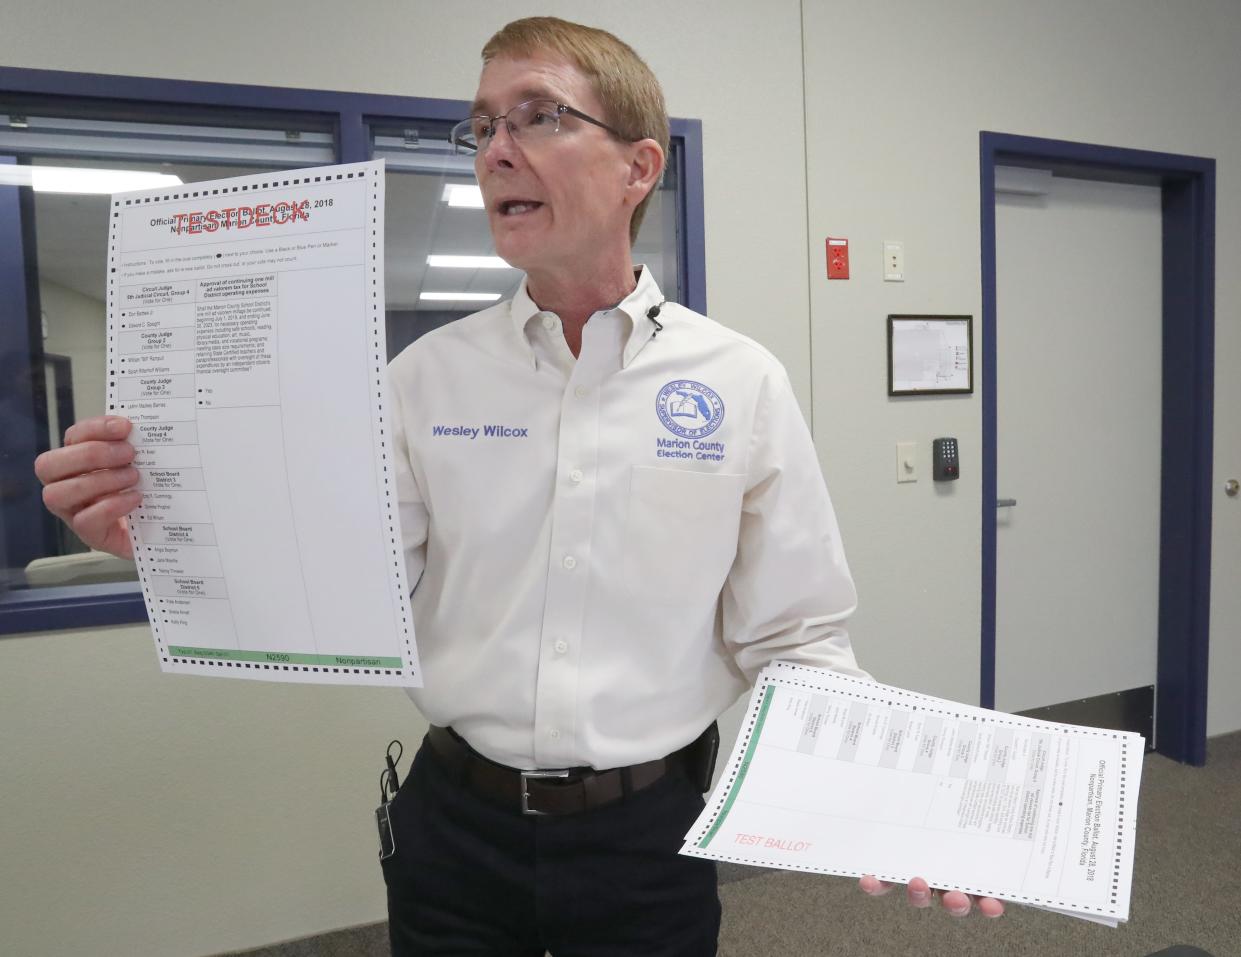 Wesley Wilcox, the Supervisor of Elections for Marion County, displays “Testdeck” sample ballots as elections technicians test ballot machines during Logic and Accuracy testing for the upcoming Primary at the Marion County Election Center on Northeast 16th Street in Ocala, Fla. in this 2018 file photo.